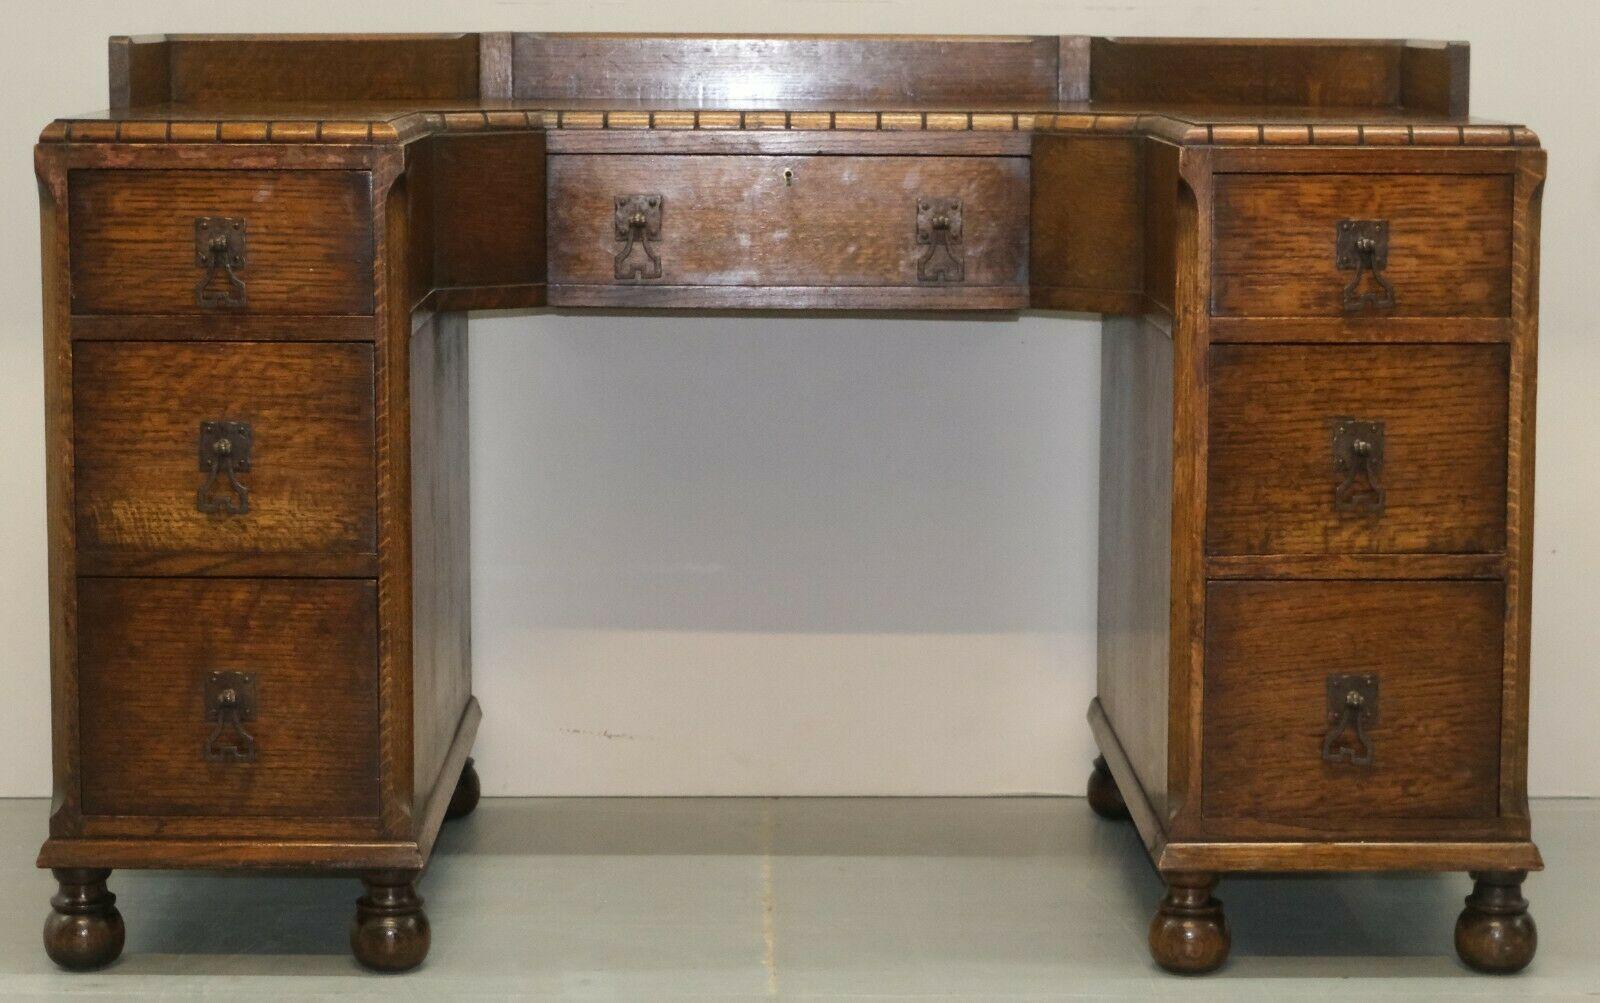 We are delighted to offer for sale this beautiful Waring & Gillow circa 1930's oak desk, dressing table on bun feet.

Made by one of the greatest furniture makers in British History; This was originally made as a vanity/dressing table but with the